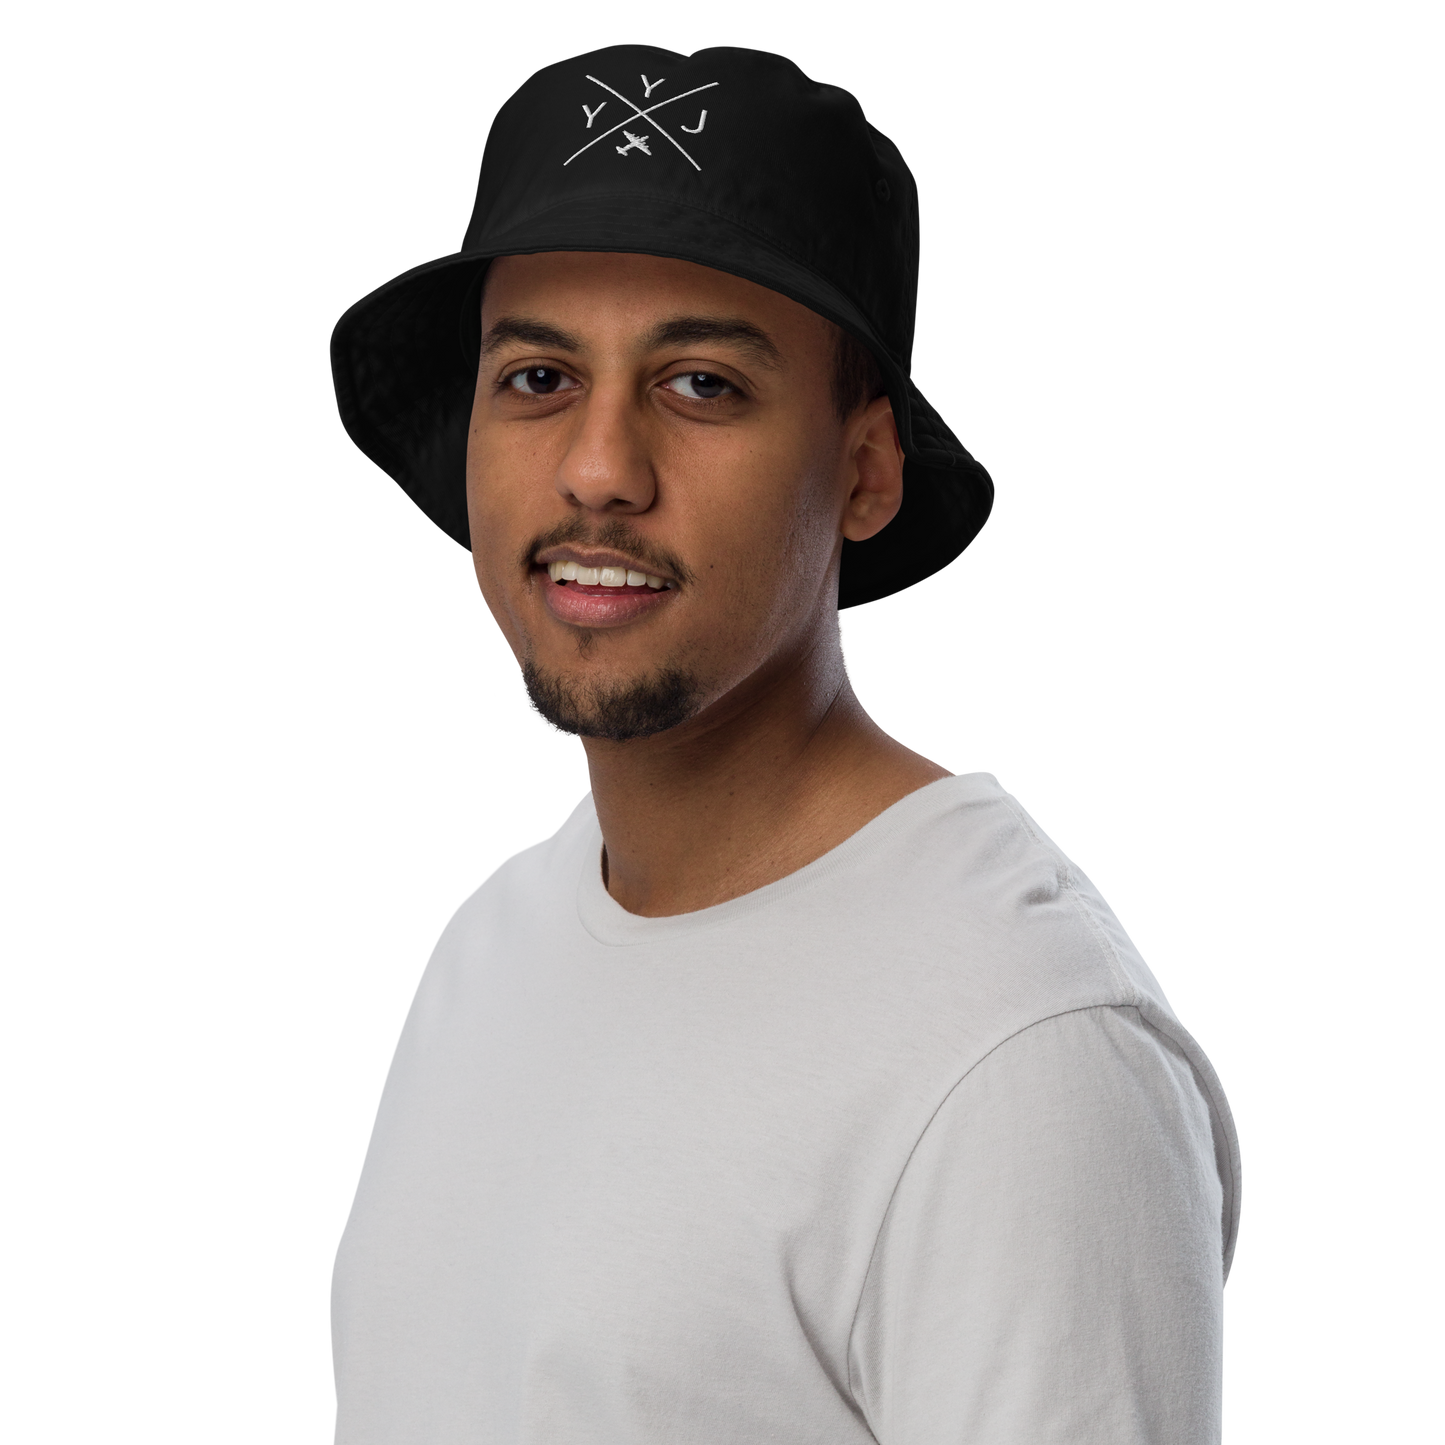 YHM Designs - YYJ Victoria Organic Cotton Bucket Hat - Crossed-X Design with Airport Code and Vintage Propliner - White Embroidery - Image 05